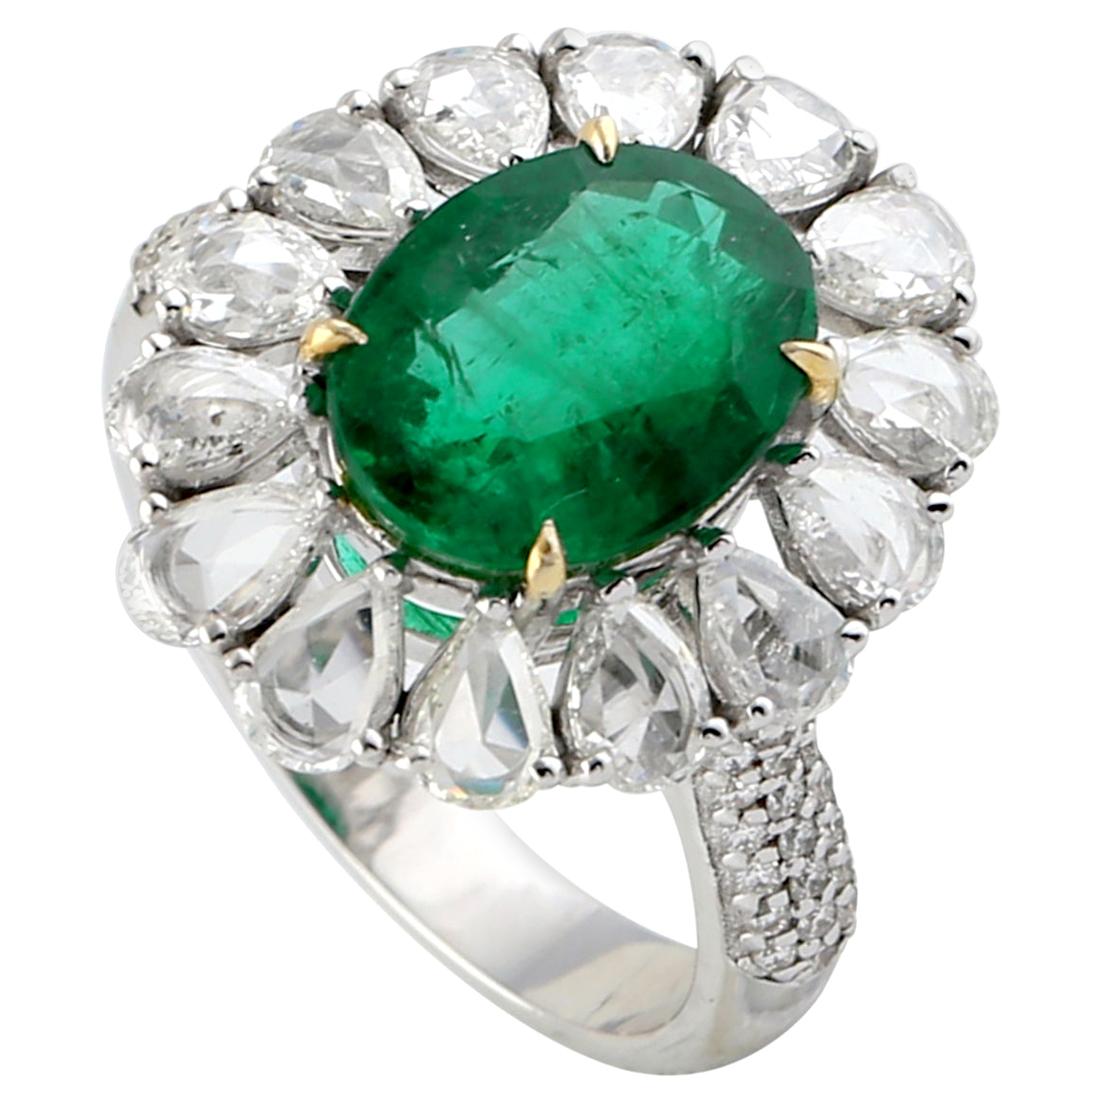 Oval Emerald and Diamond Ring Set in 18 Karat White Gold